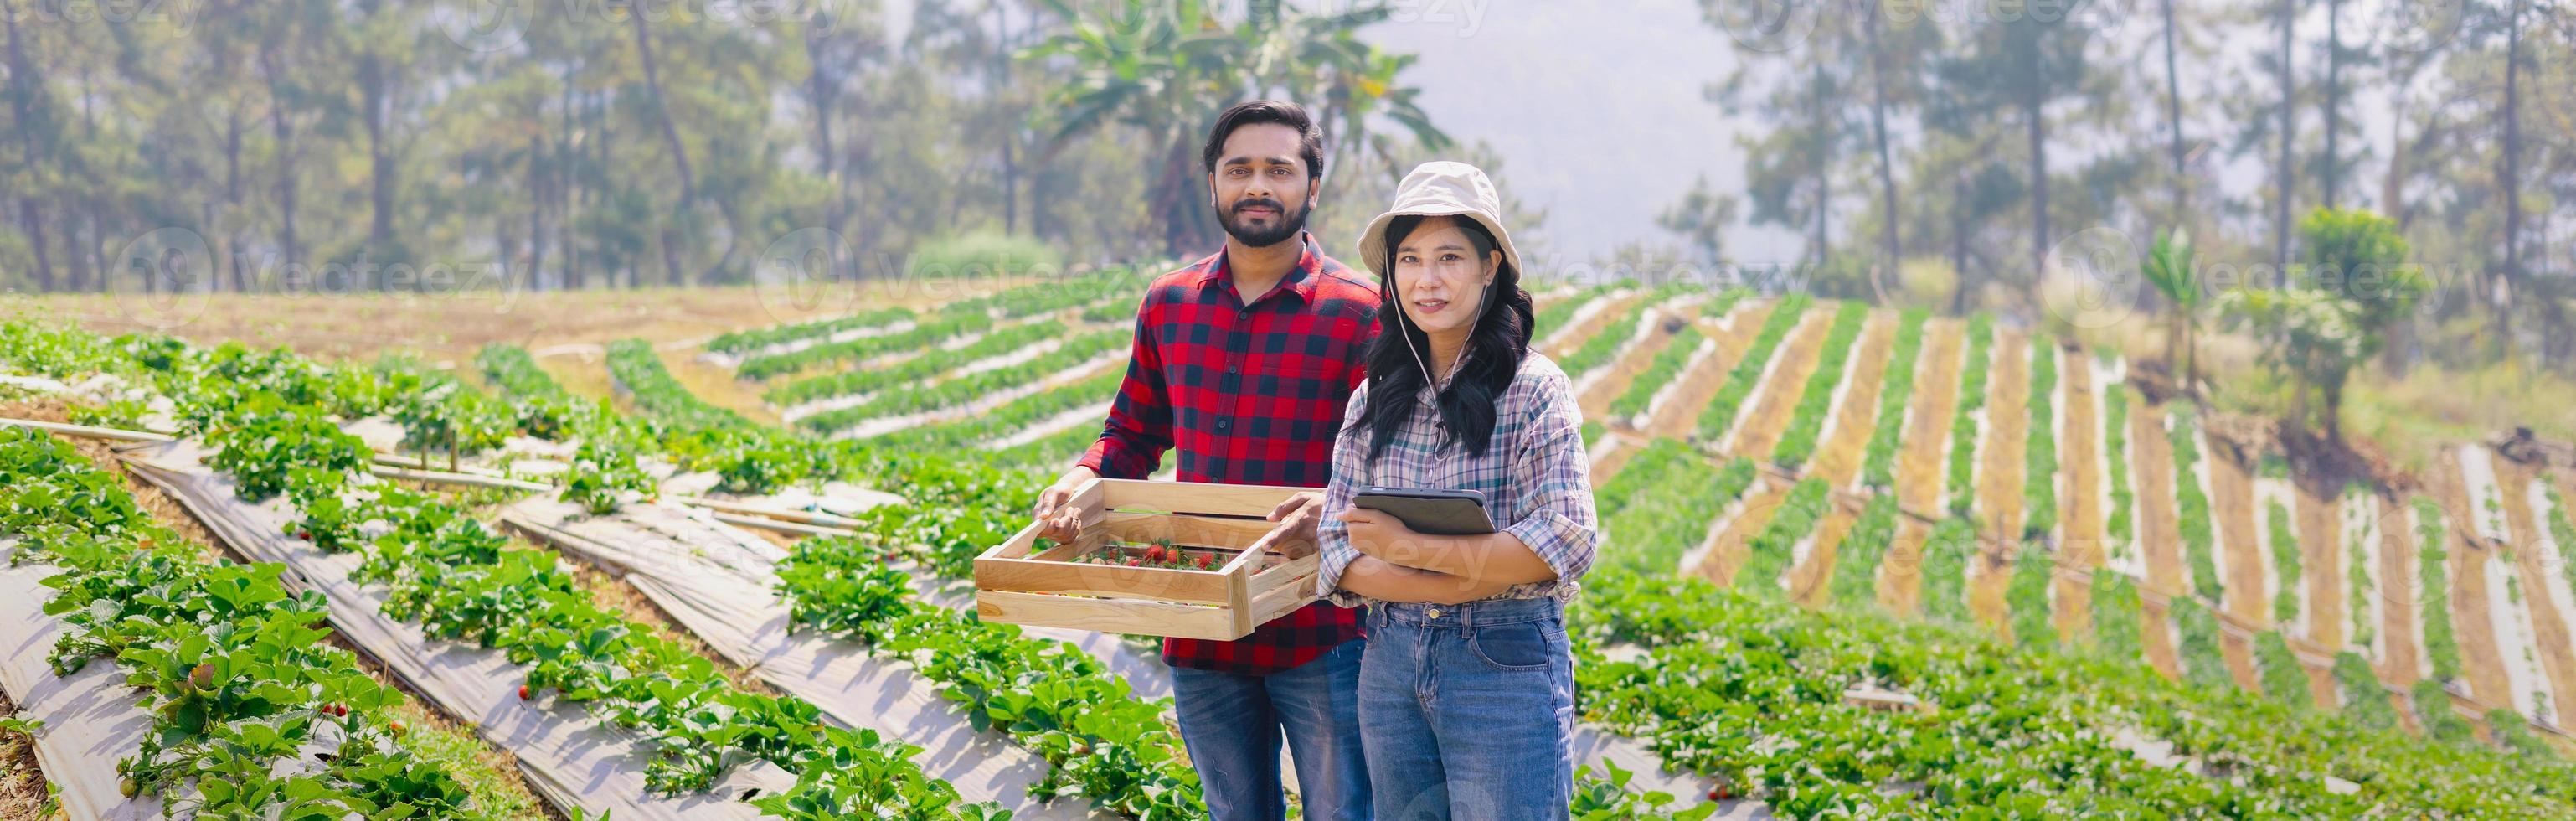 Young couple gardener picking strawberry at farm field photo